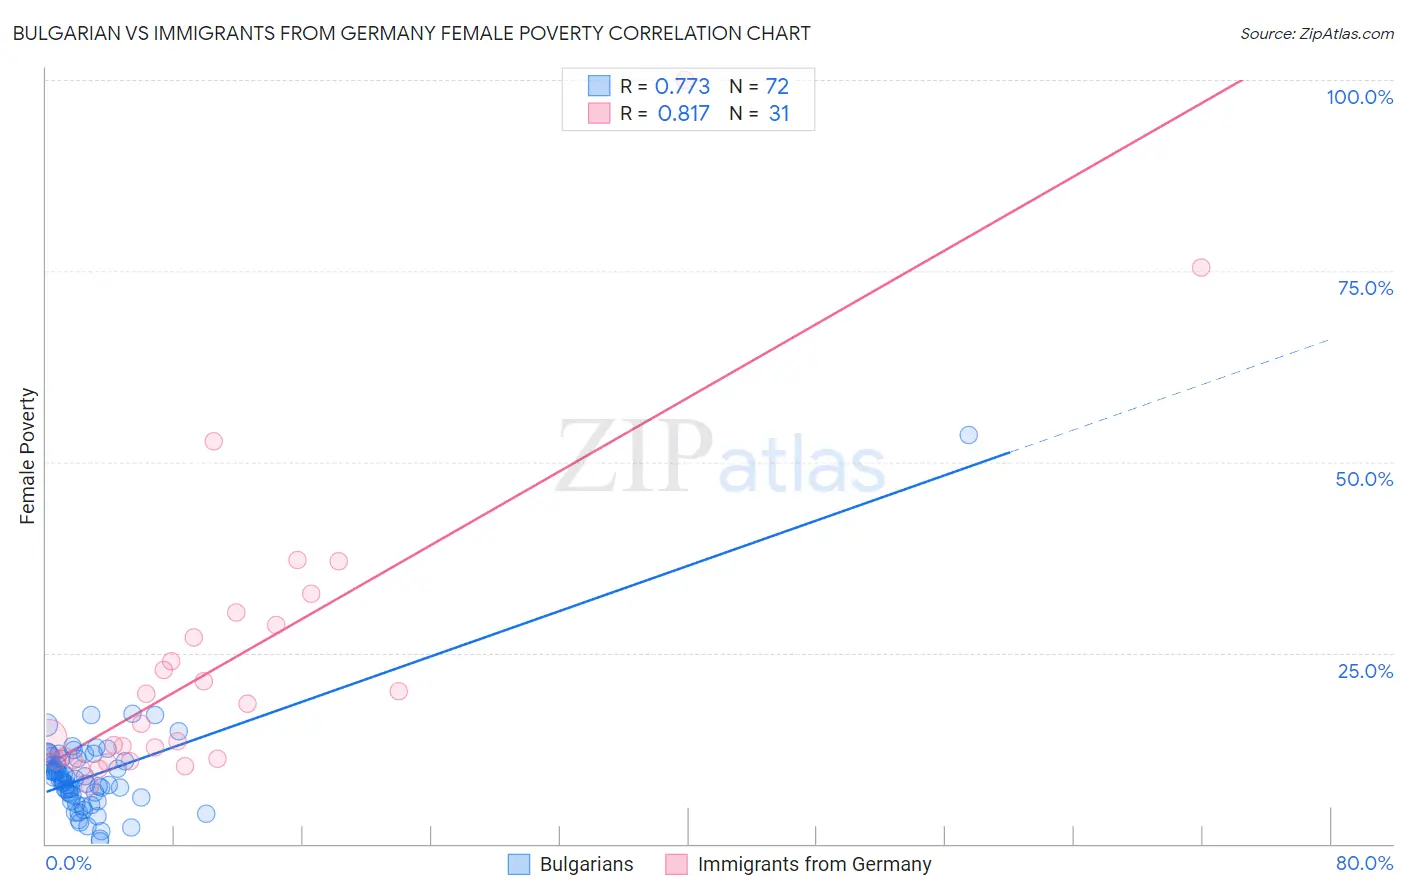 Bulgarian vs Immigrants from Germany Female Poverty